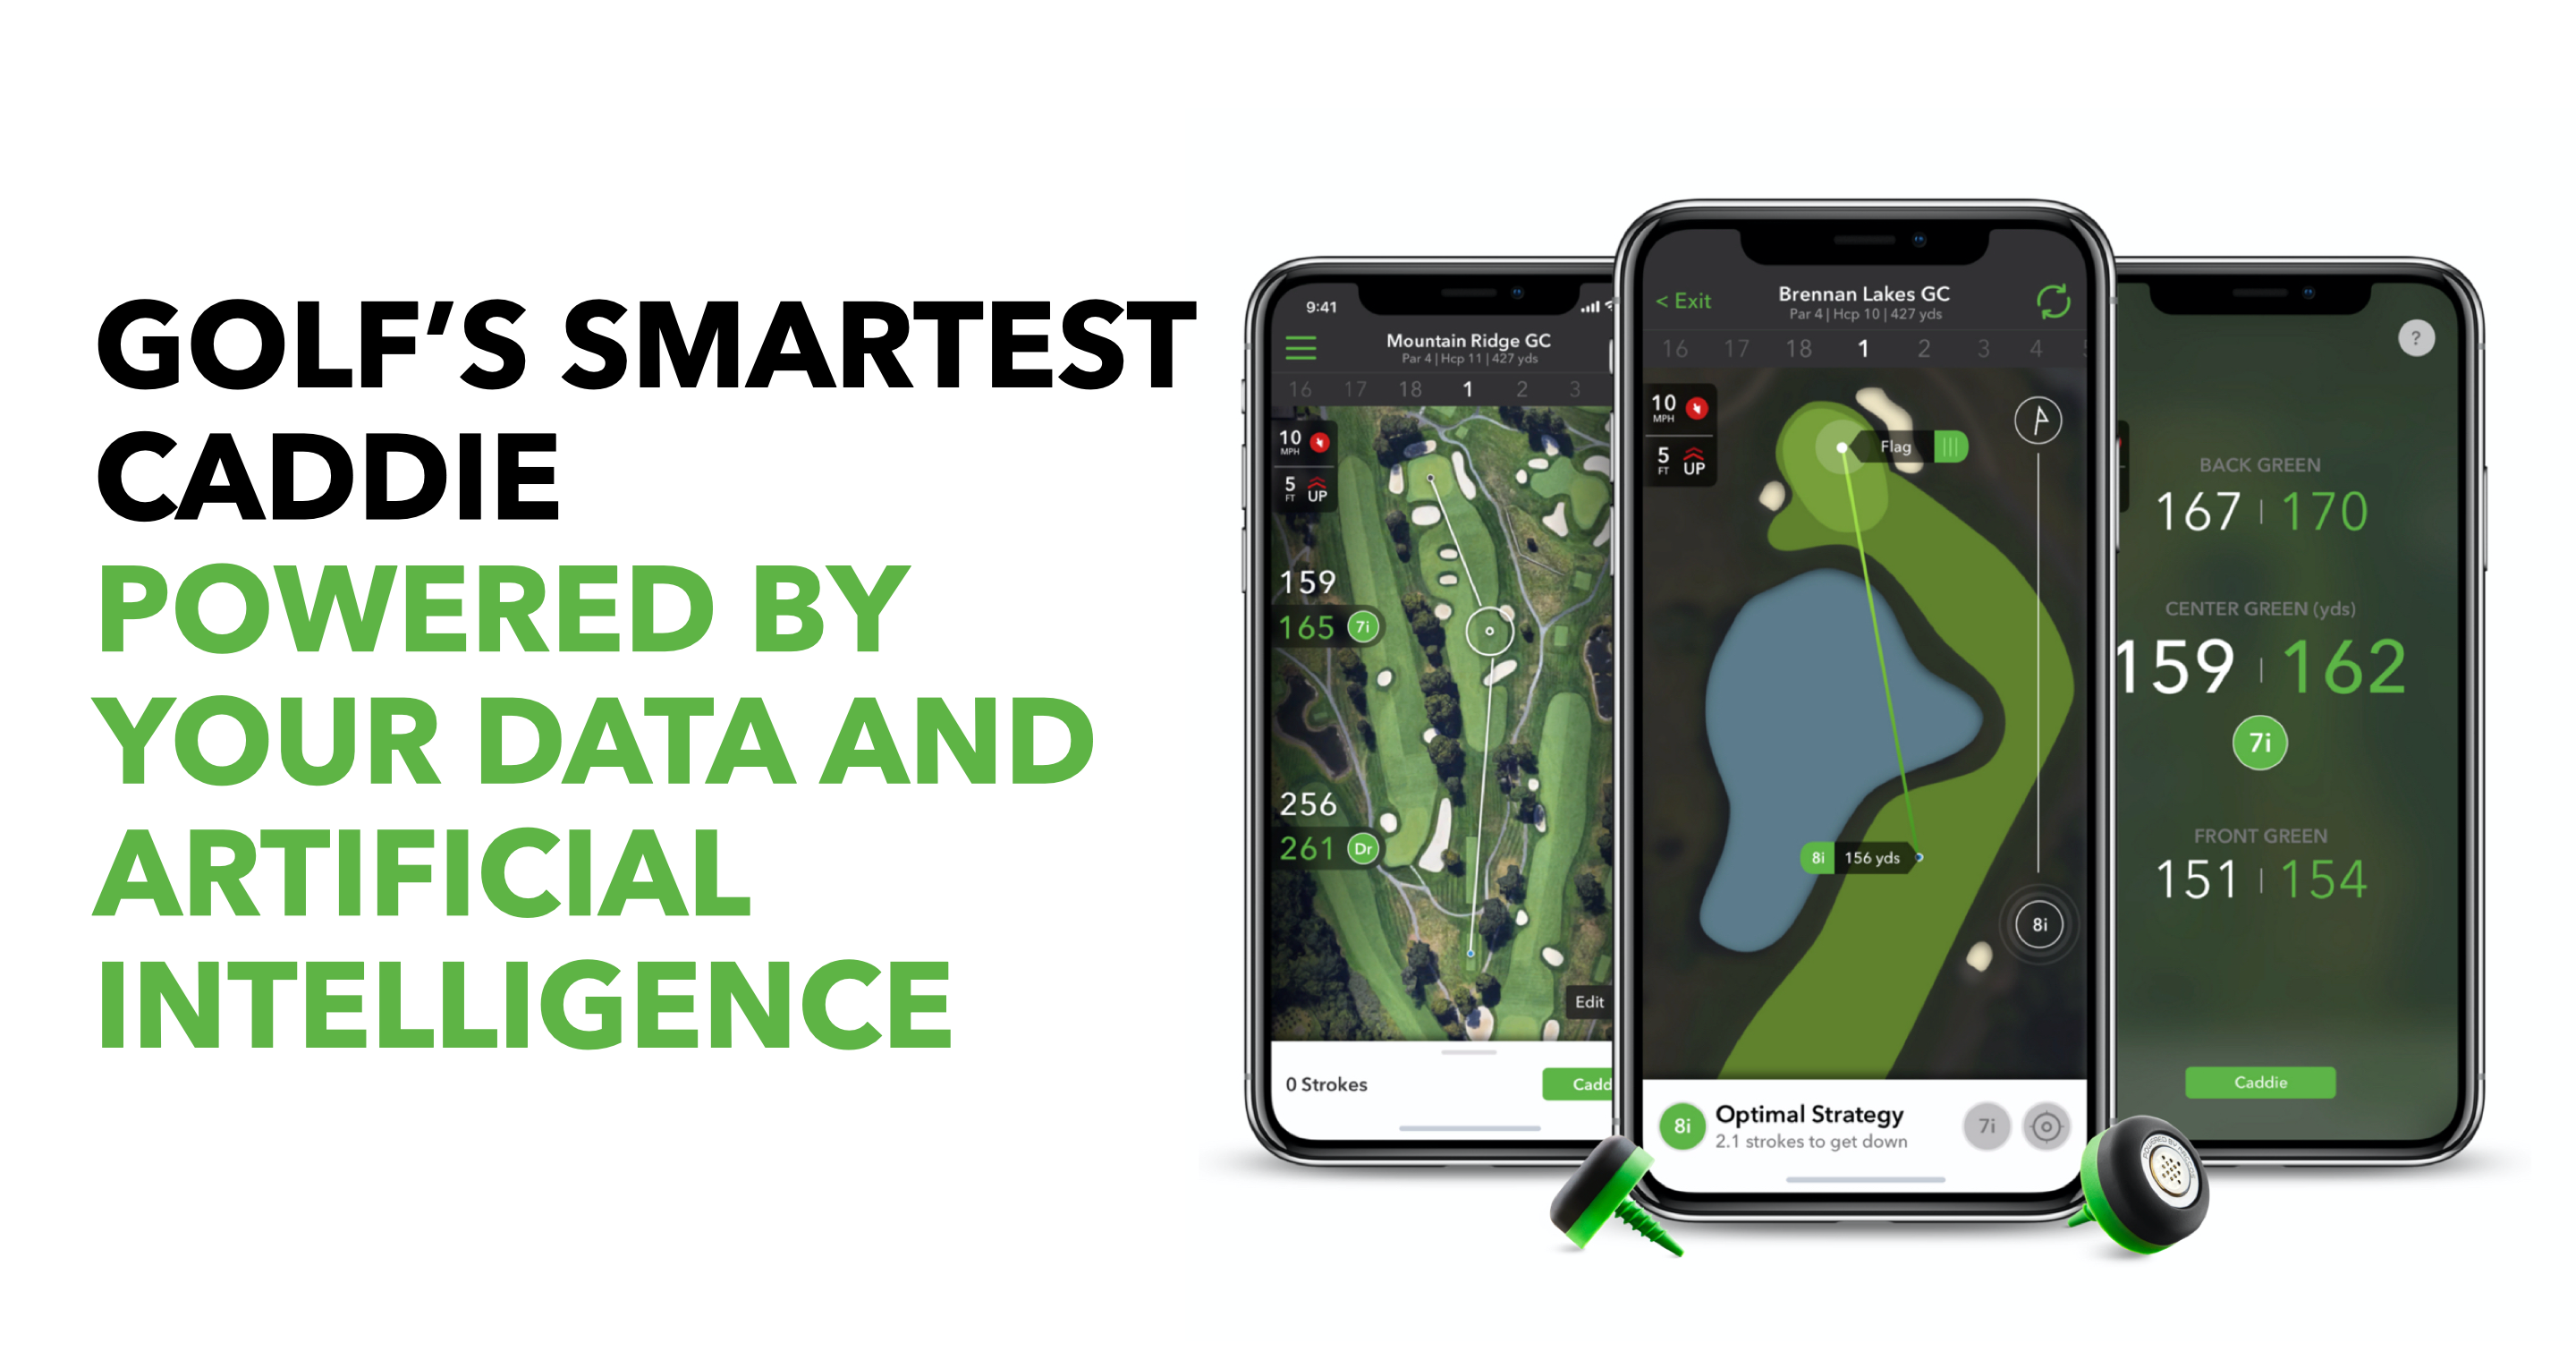 Arccos Caddie, Golf's Smartest Caddie Powered By Your Data And Artificial Intelligence